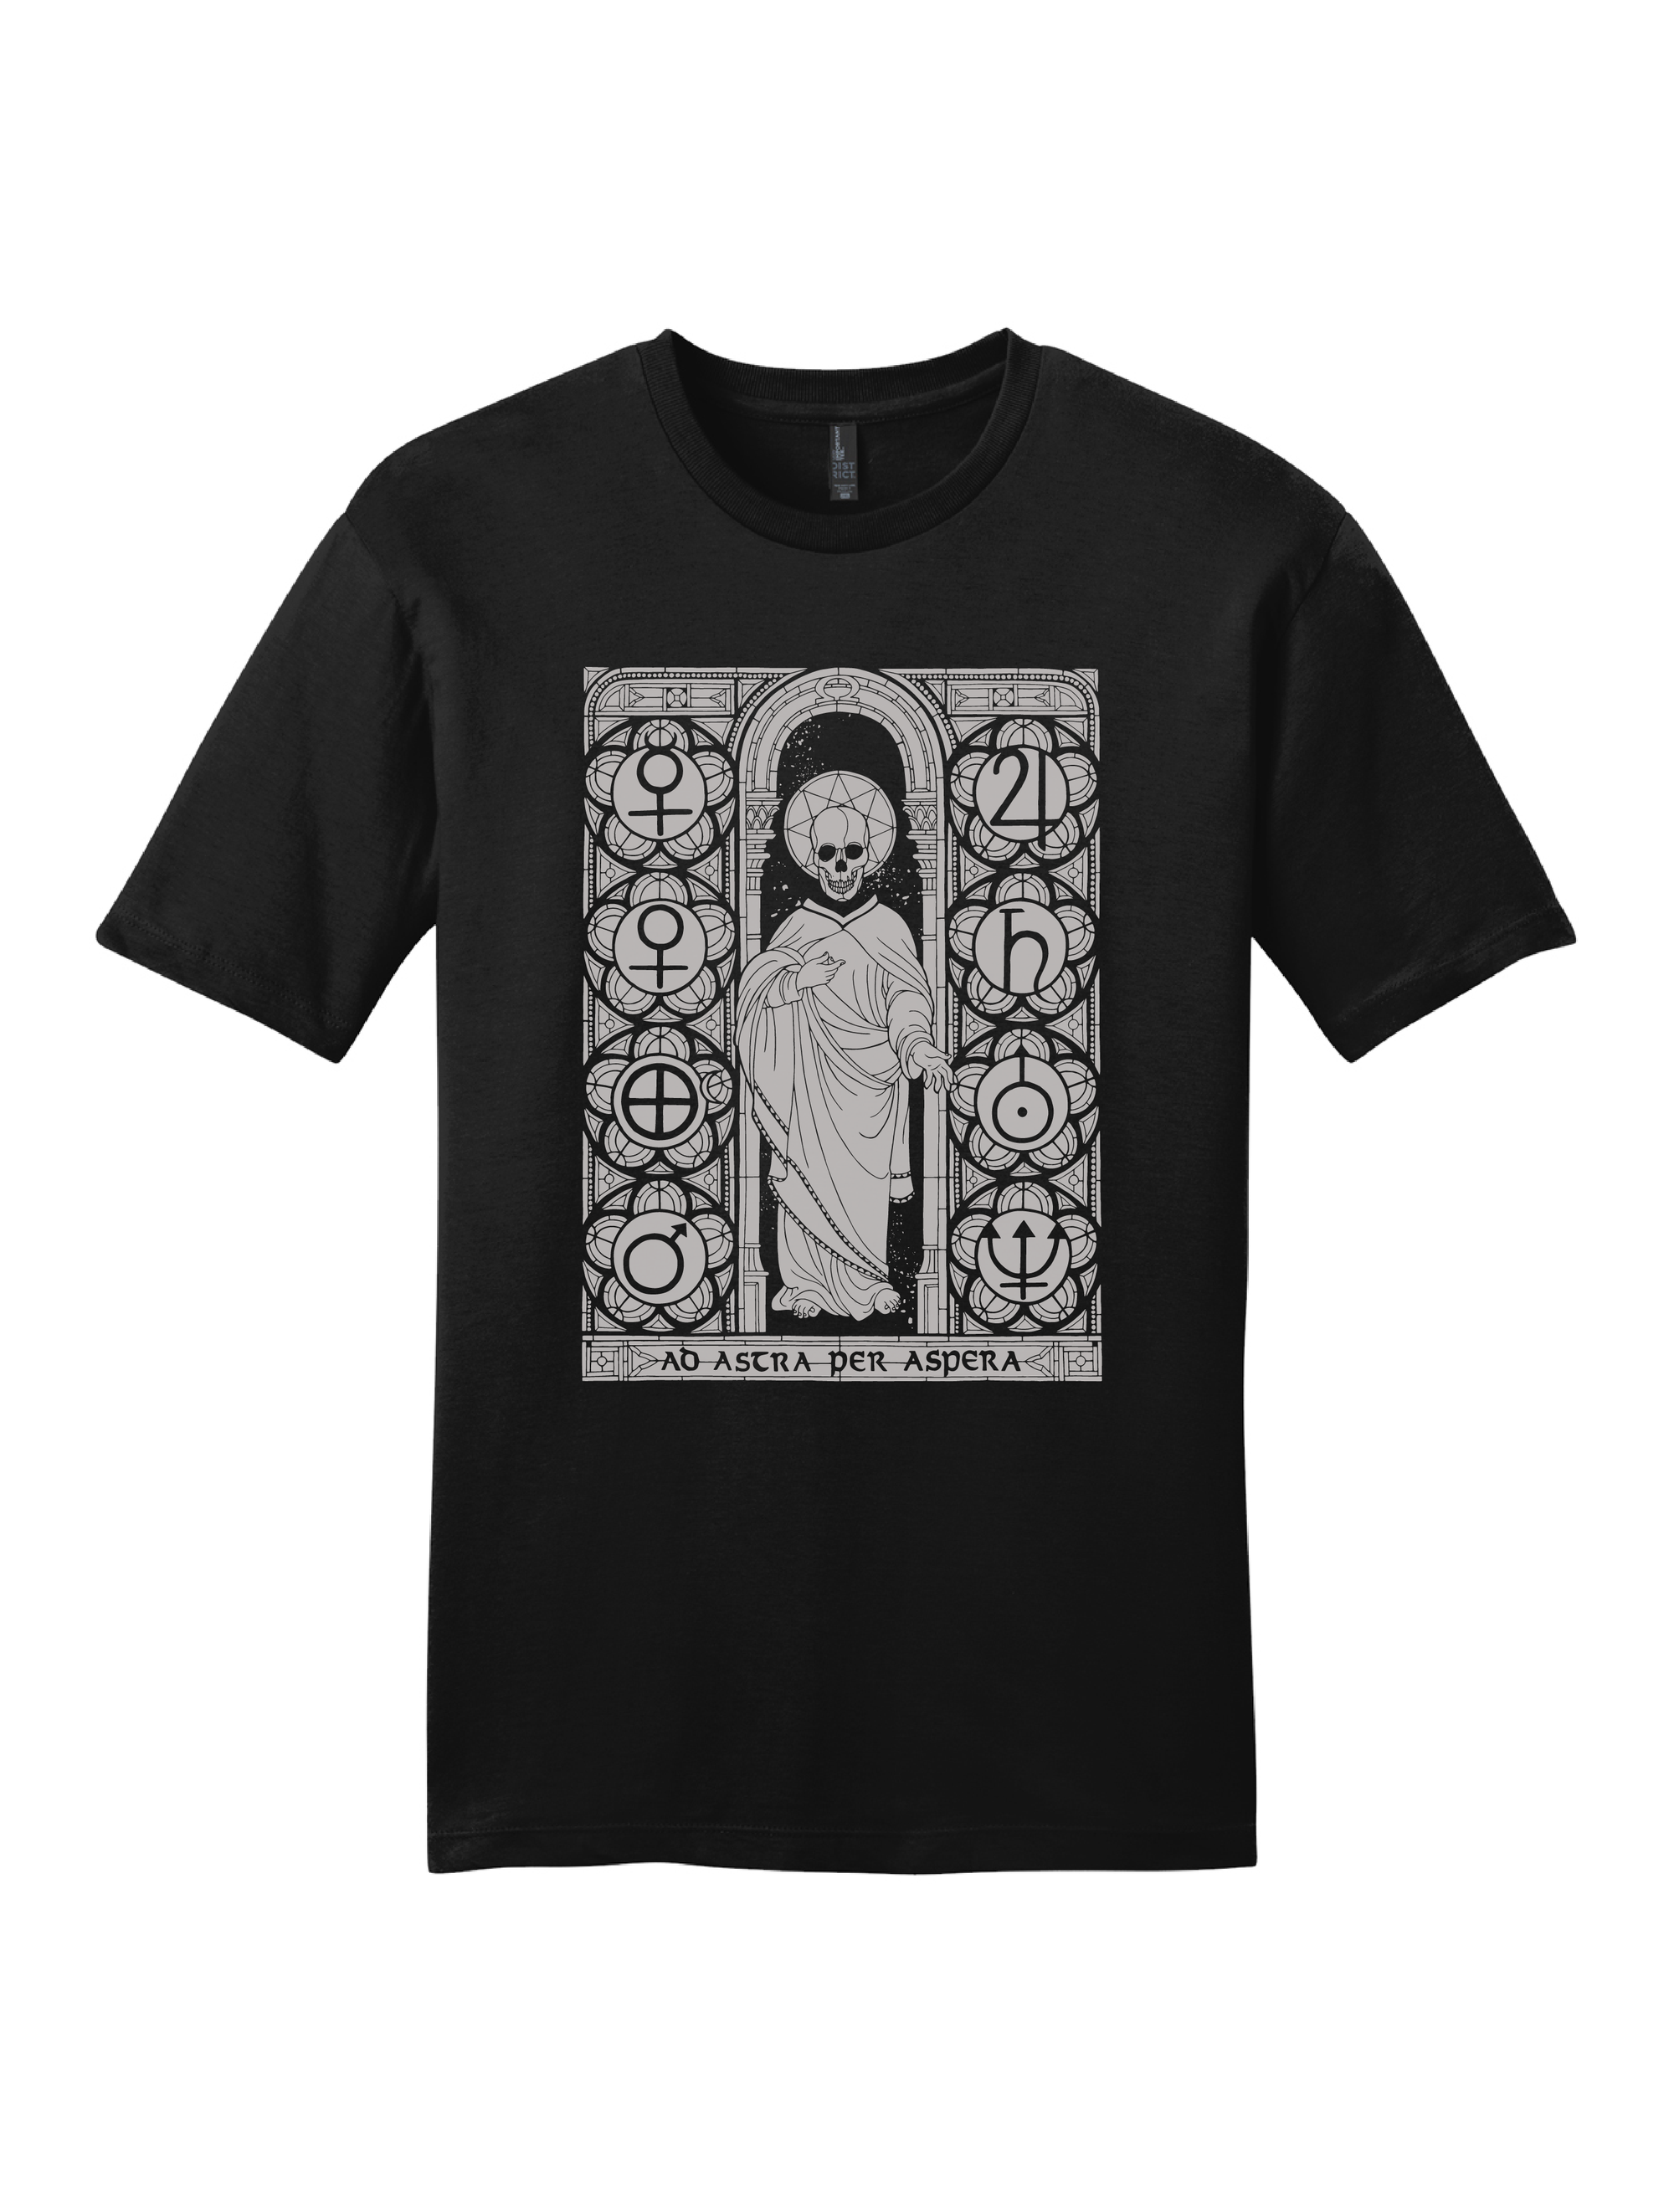 Skeleton in medieval robe surrounded by astrological glyphs in grey by Brandon Stewart, on a black short sleeve tee